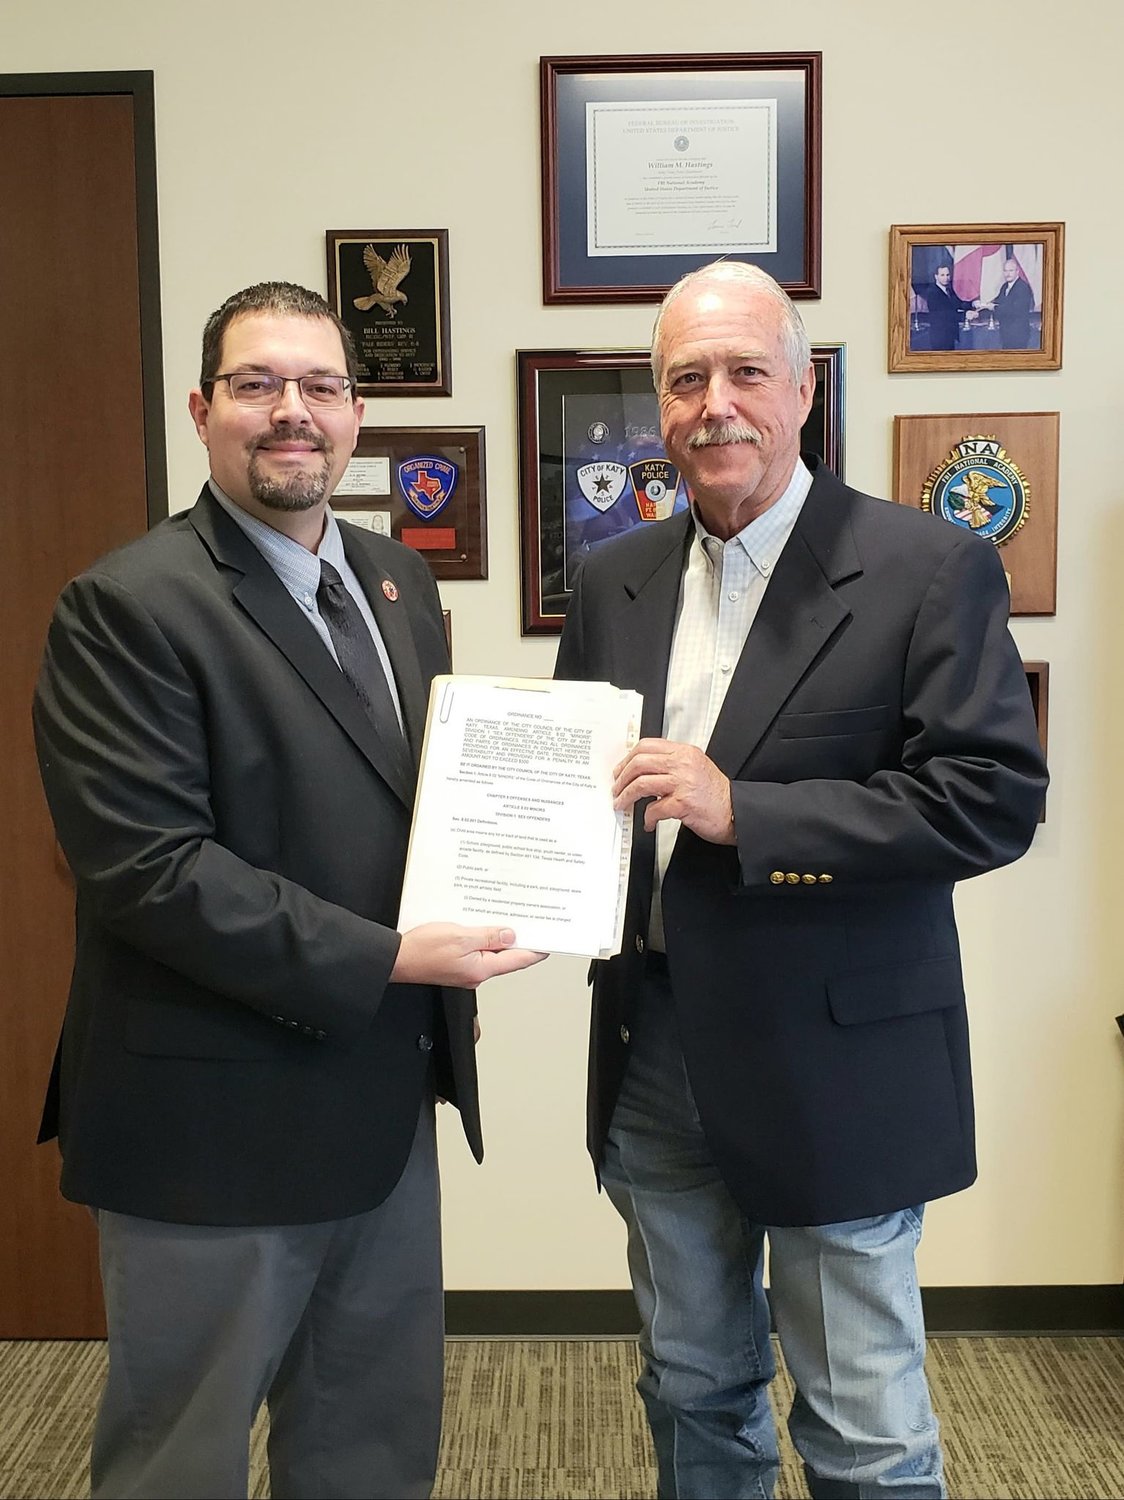 Katy's Mayor Pro Tem Chris Harris (left) and Mayor Bill Hastings (right) pose with a copy of the city's new ordinance which restricts where registered sex offenders may live or visit in the city.